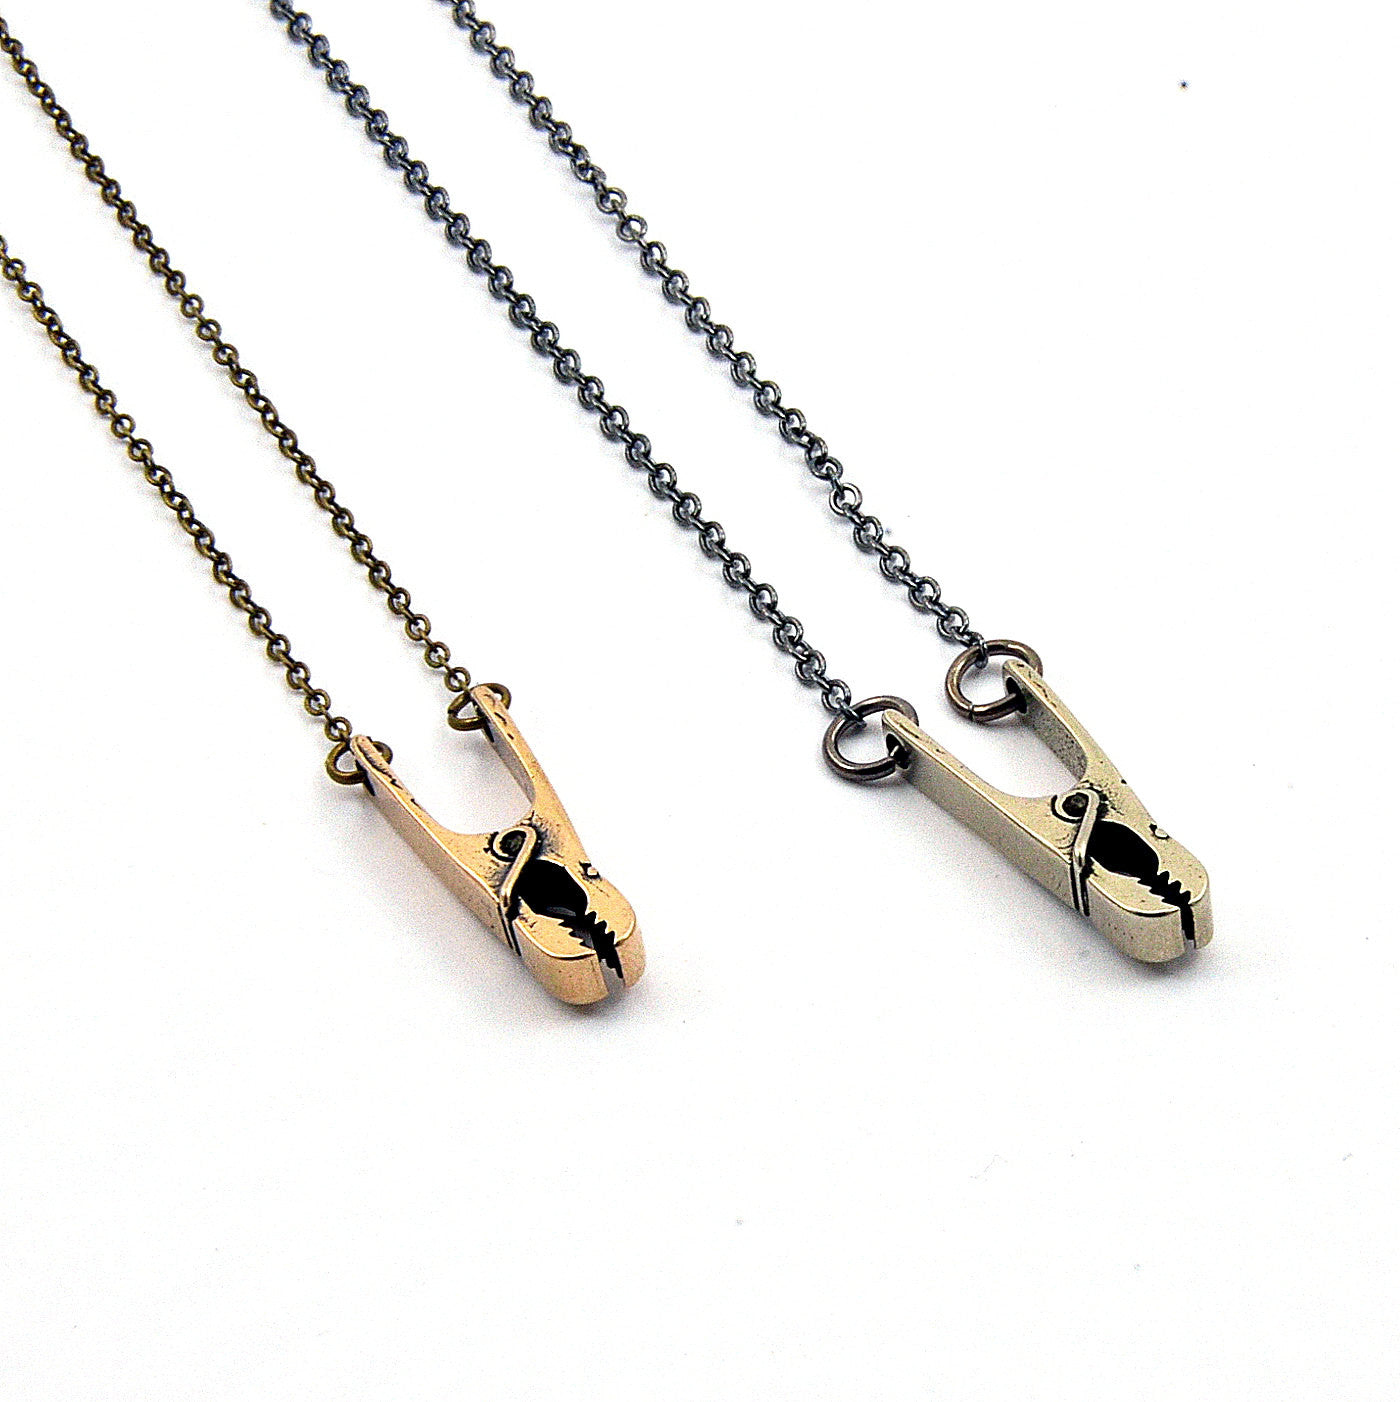 Clothes Pin Necklace - Gwen Delicious Jewelry Designs